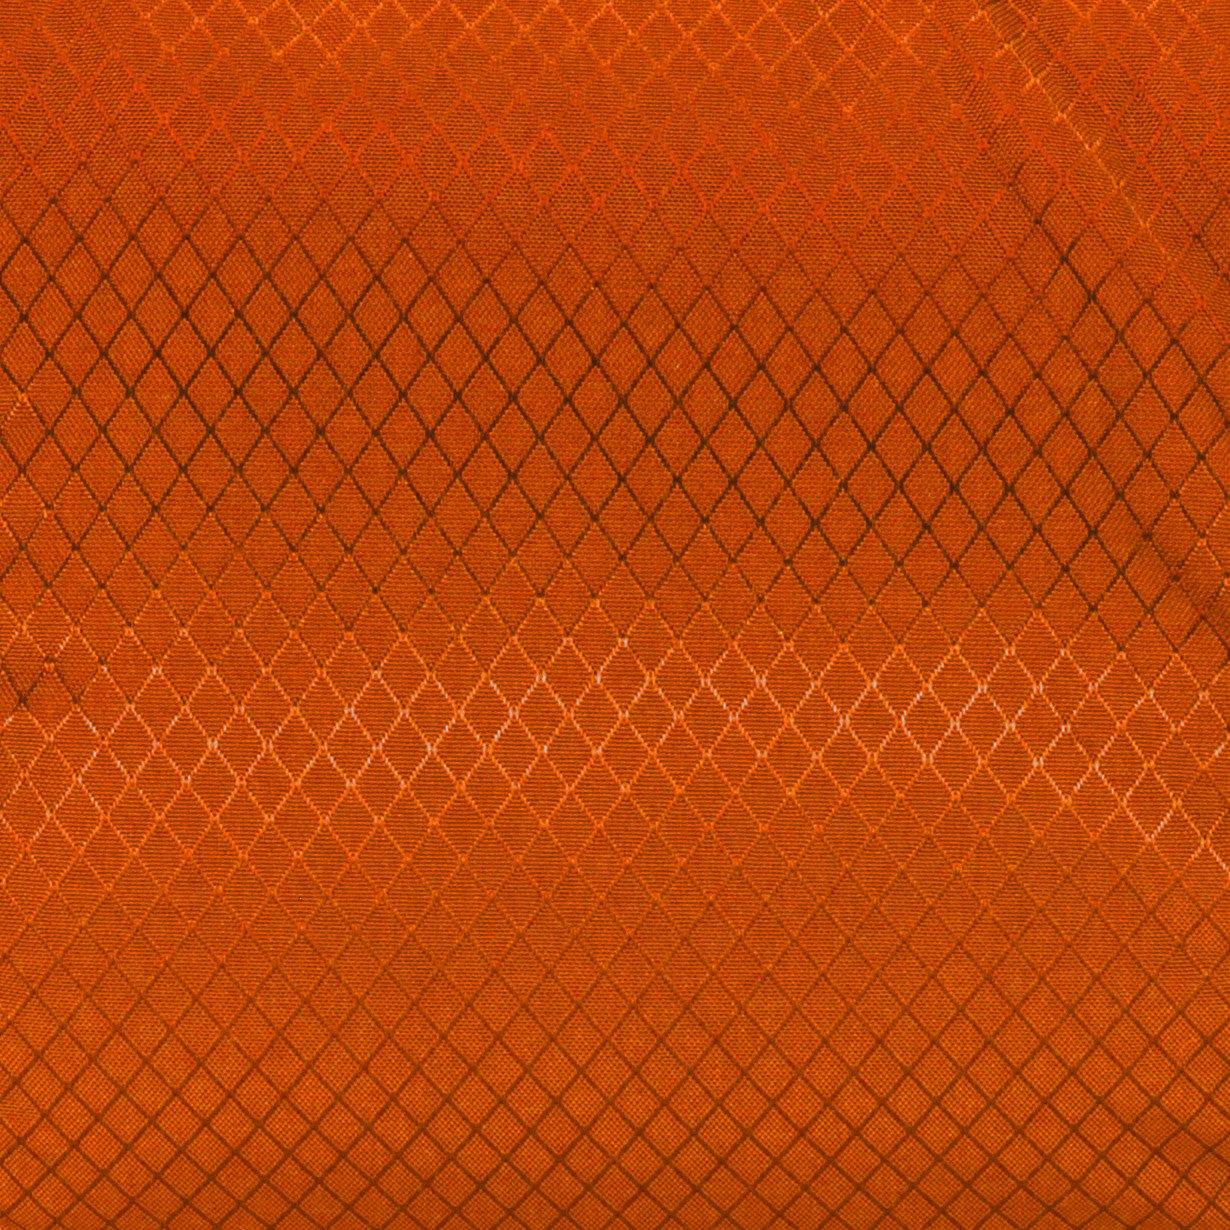 Studio photo the International Orange SD1640DLX Standard Duffle by Northstar Bags. 131 liter duffel with diamond ripstop fabric, thick webbing straps, and a large format metal zipper. Guaranteed for life.